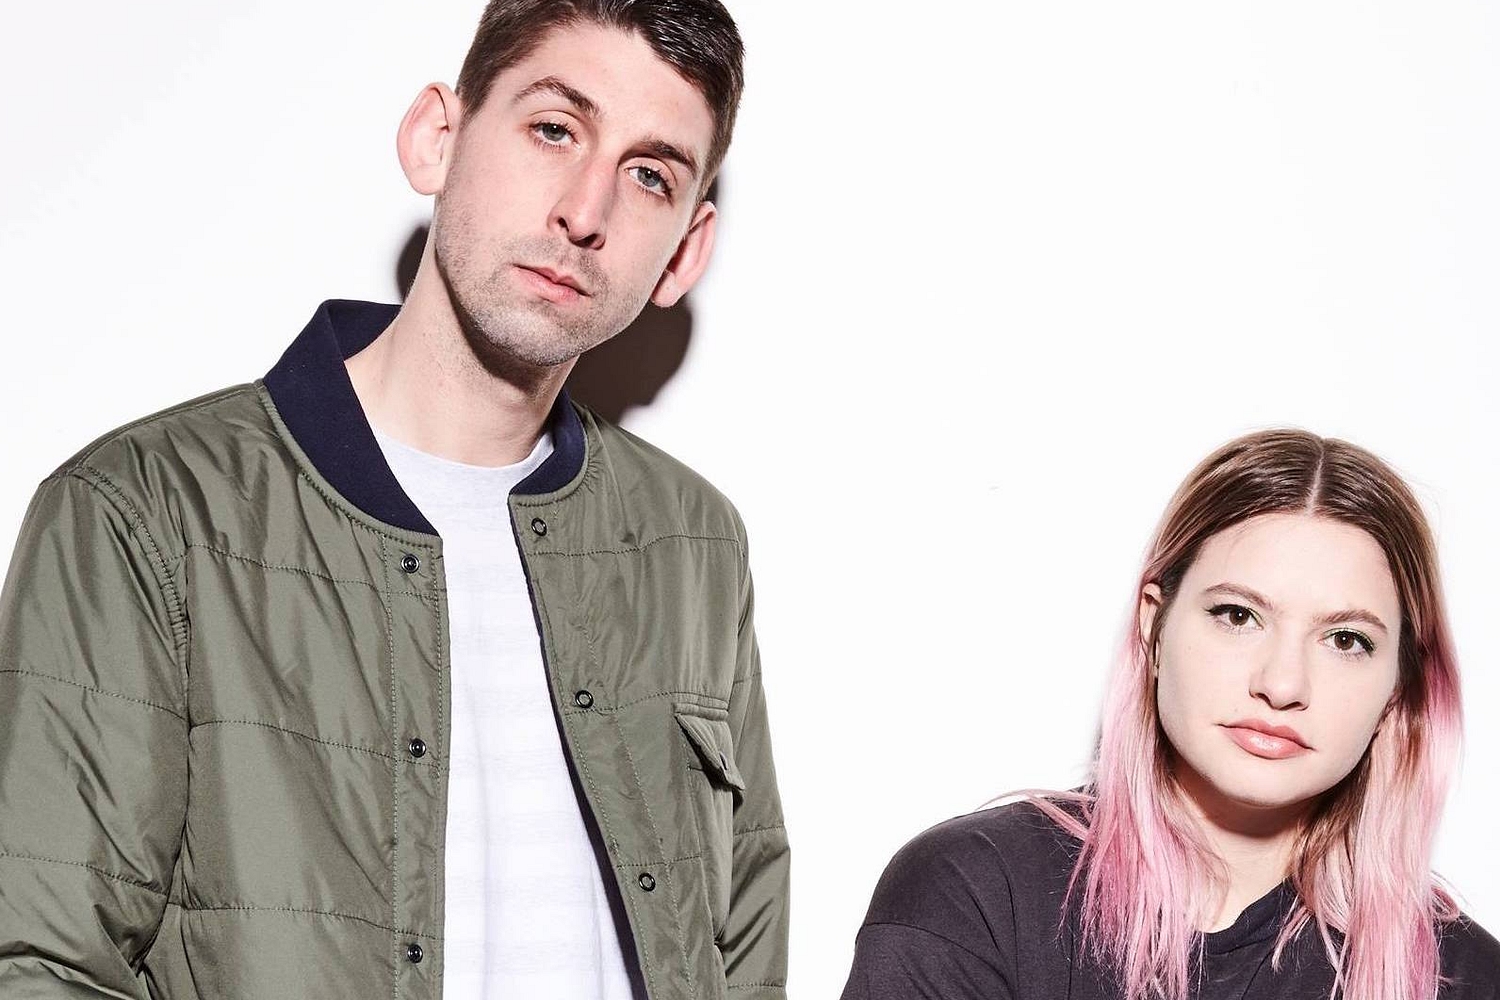 Tigers Jaw have announced a new UK tour